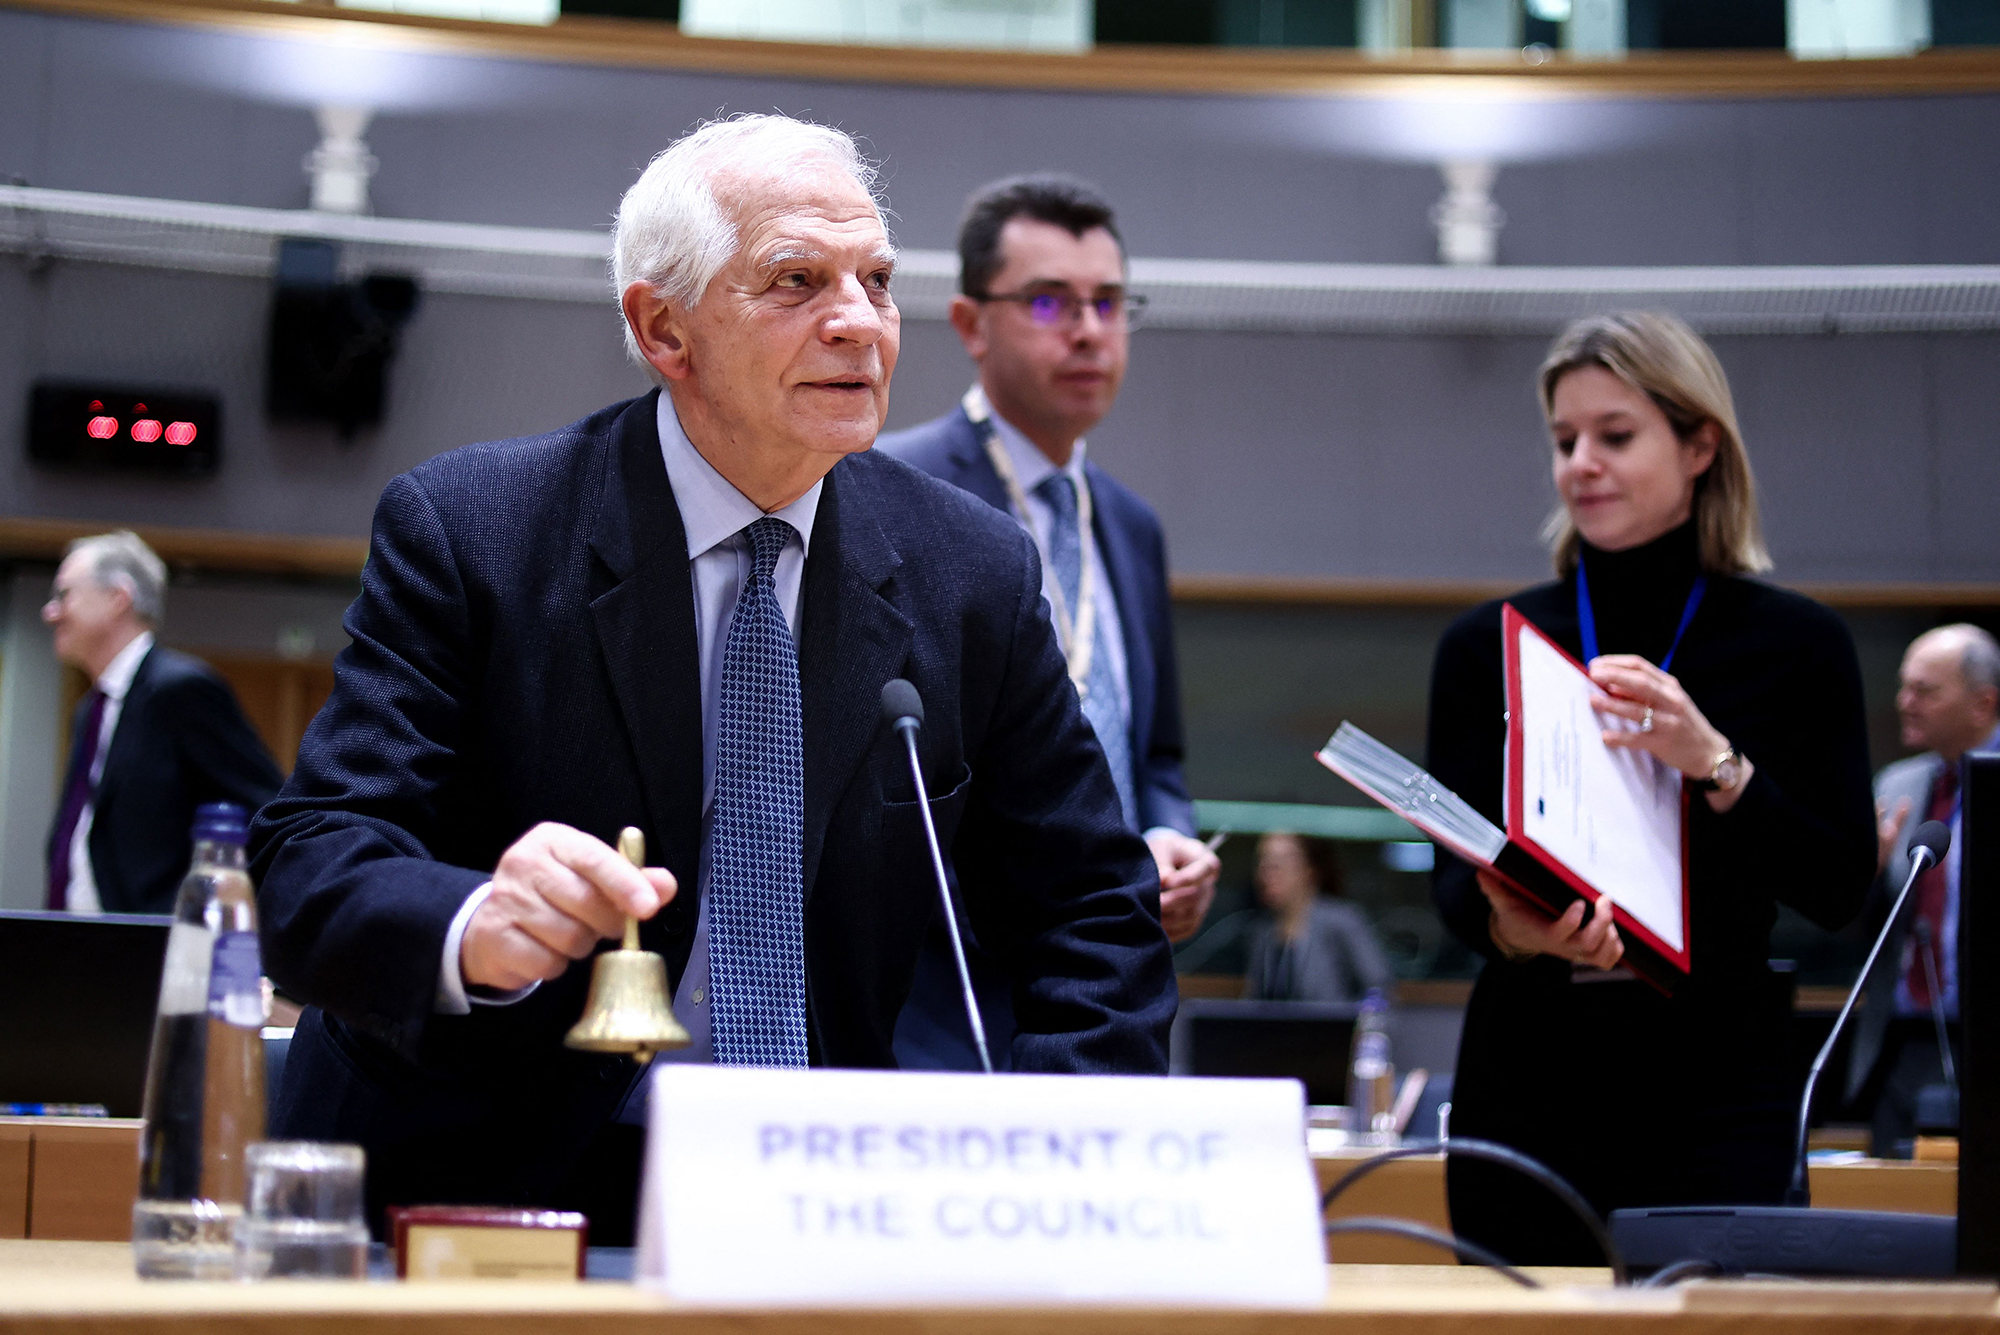 The European Commission's High Representative for Foreign Affairs and Security Policy Josep Borrell rings the bell before a meeting of Foreign Affairs Council at the EU headquarters in Brussels, on February 20.